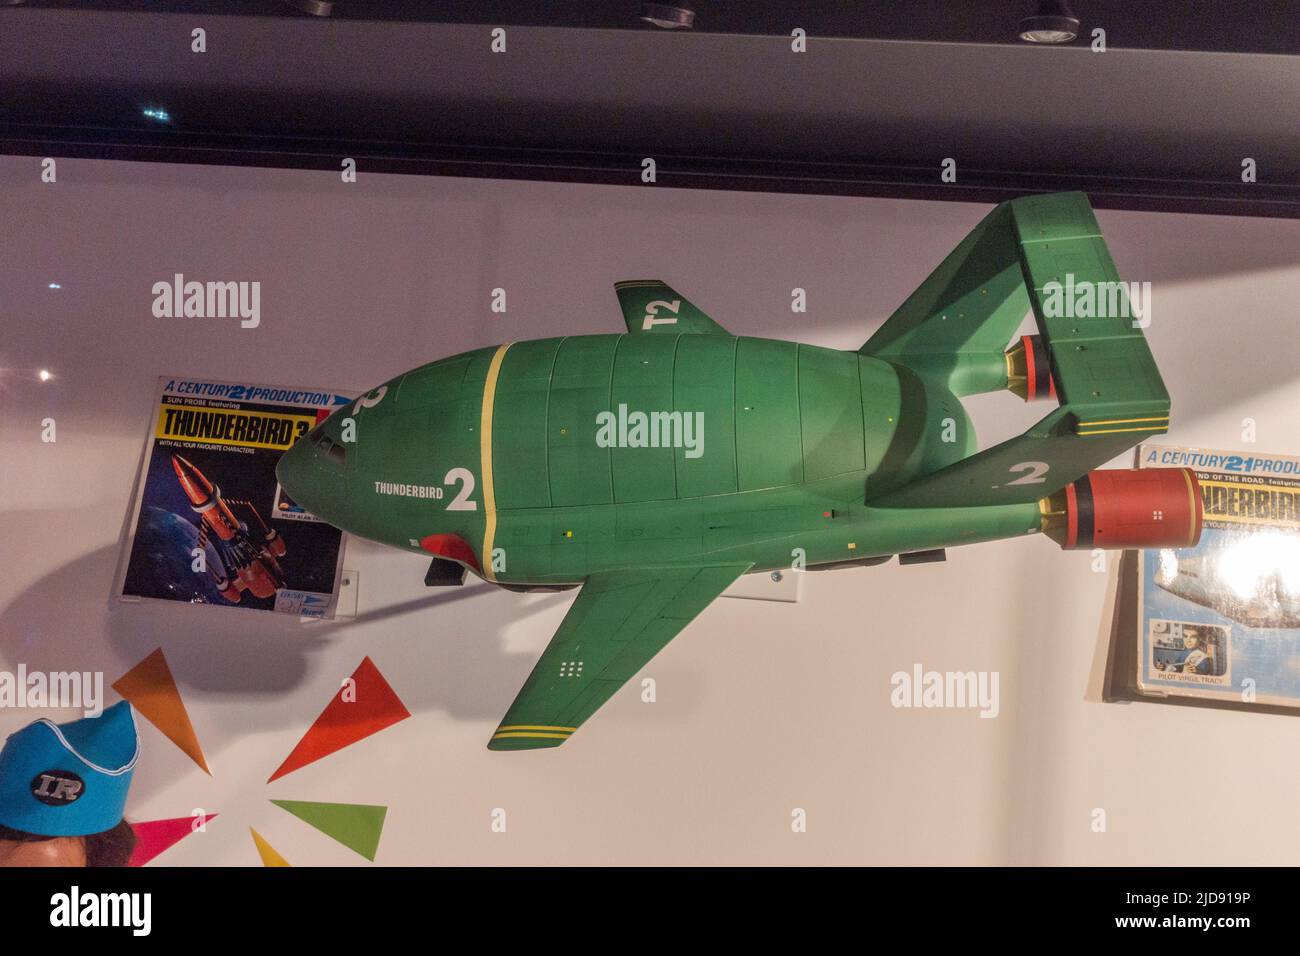 A Thunderbird 2 model from the BBC 1970s children's tv show 'Thunderbirds', on display in a media museum. Stock Photo